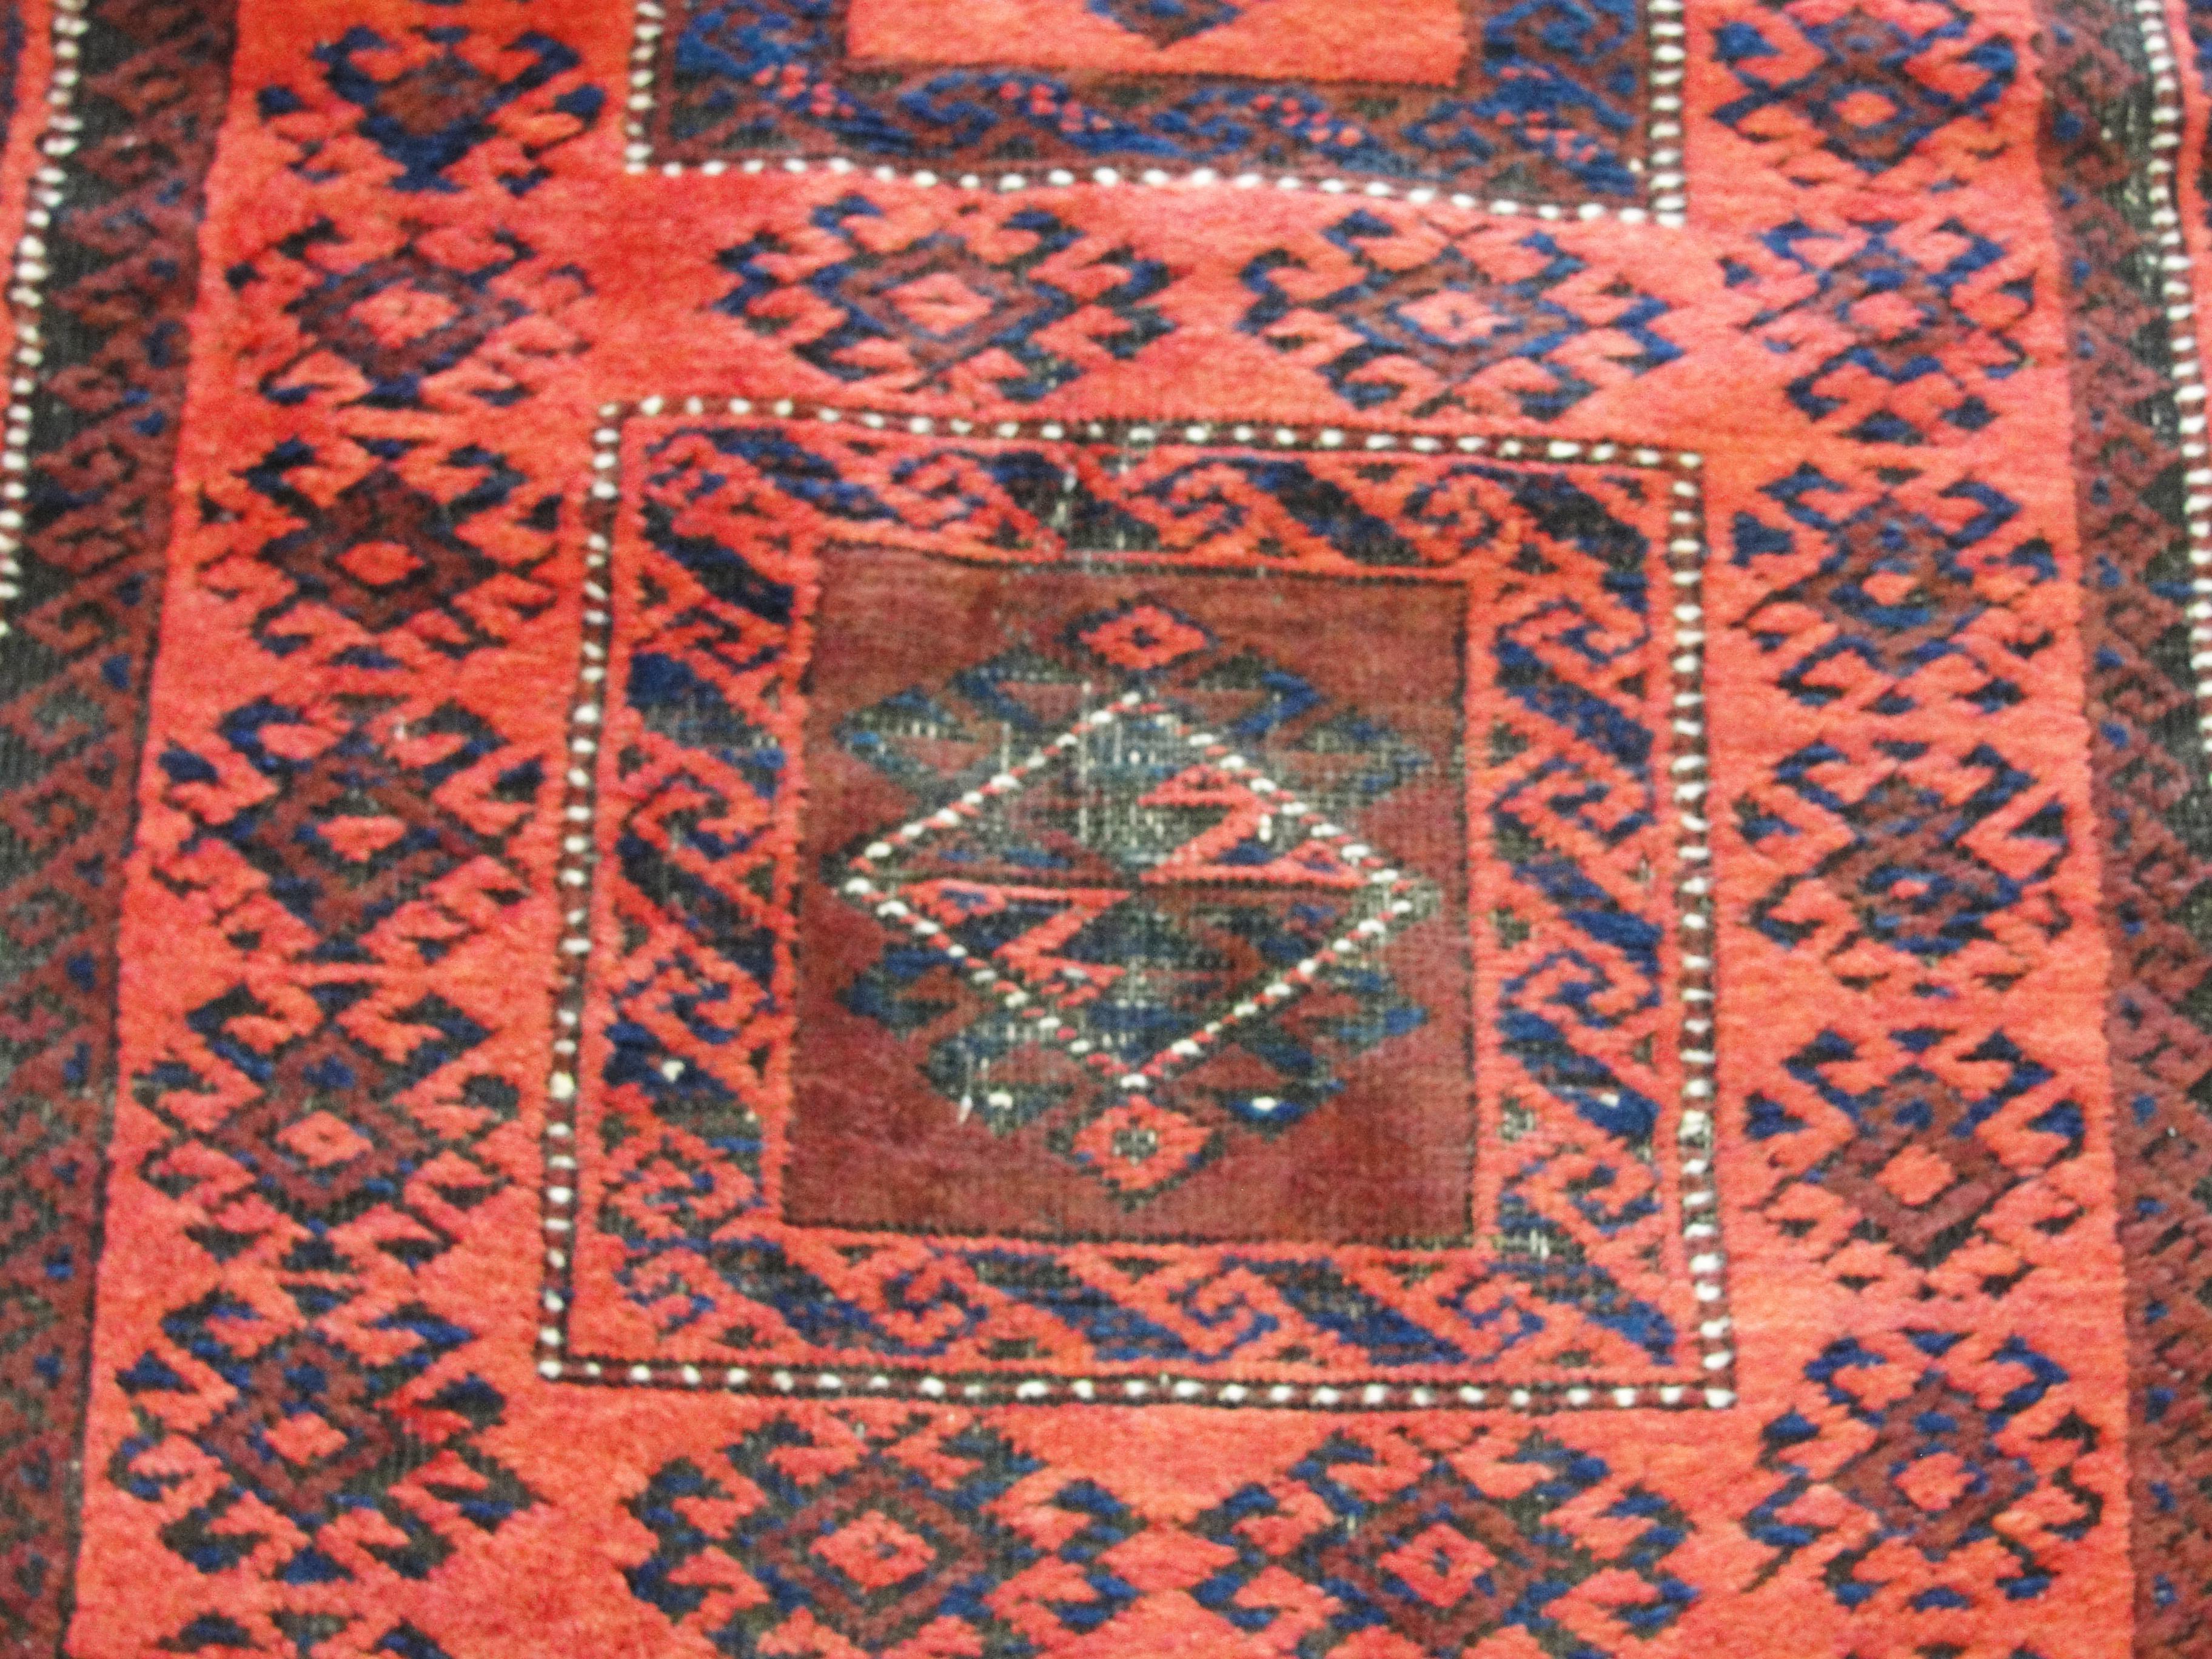 Central Asian Antique Belouch Rug